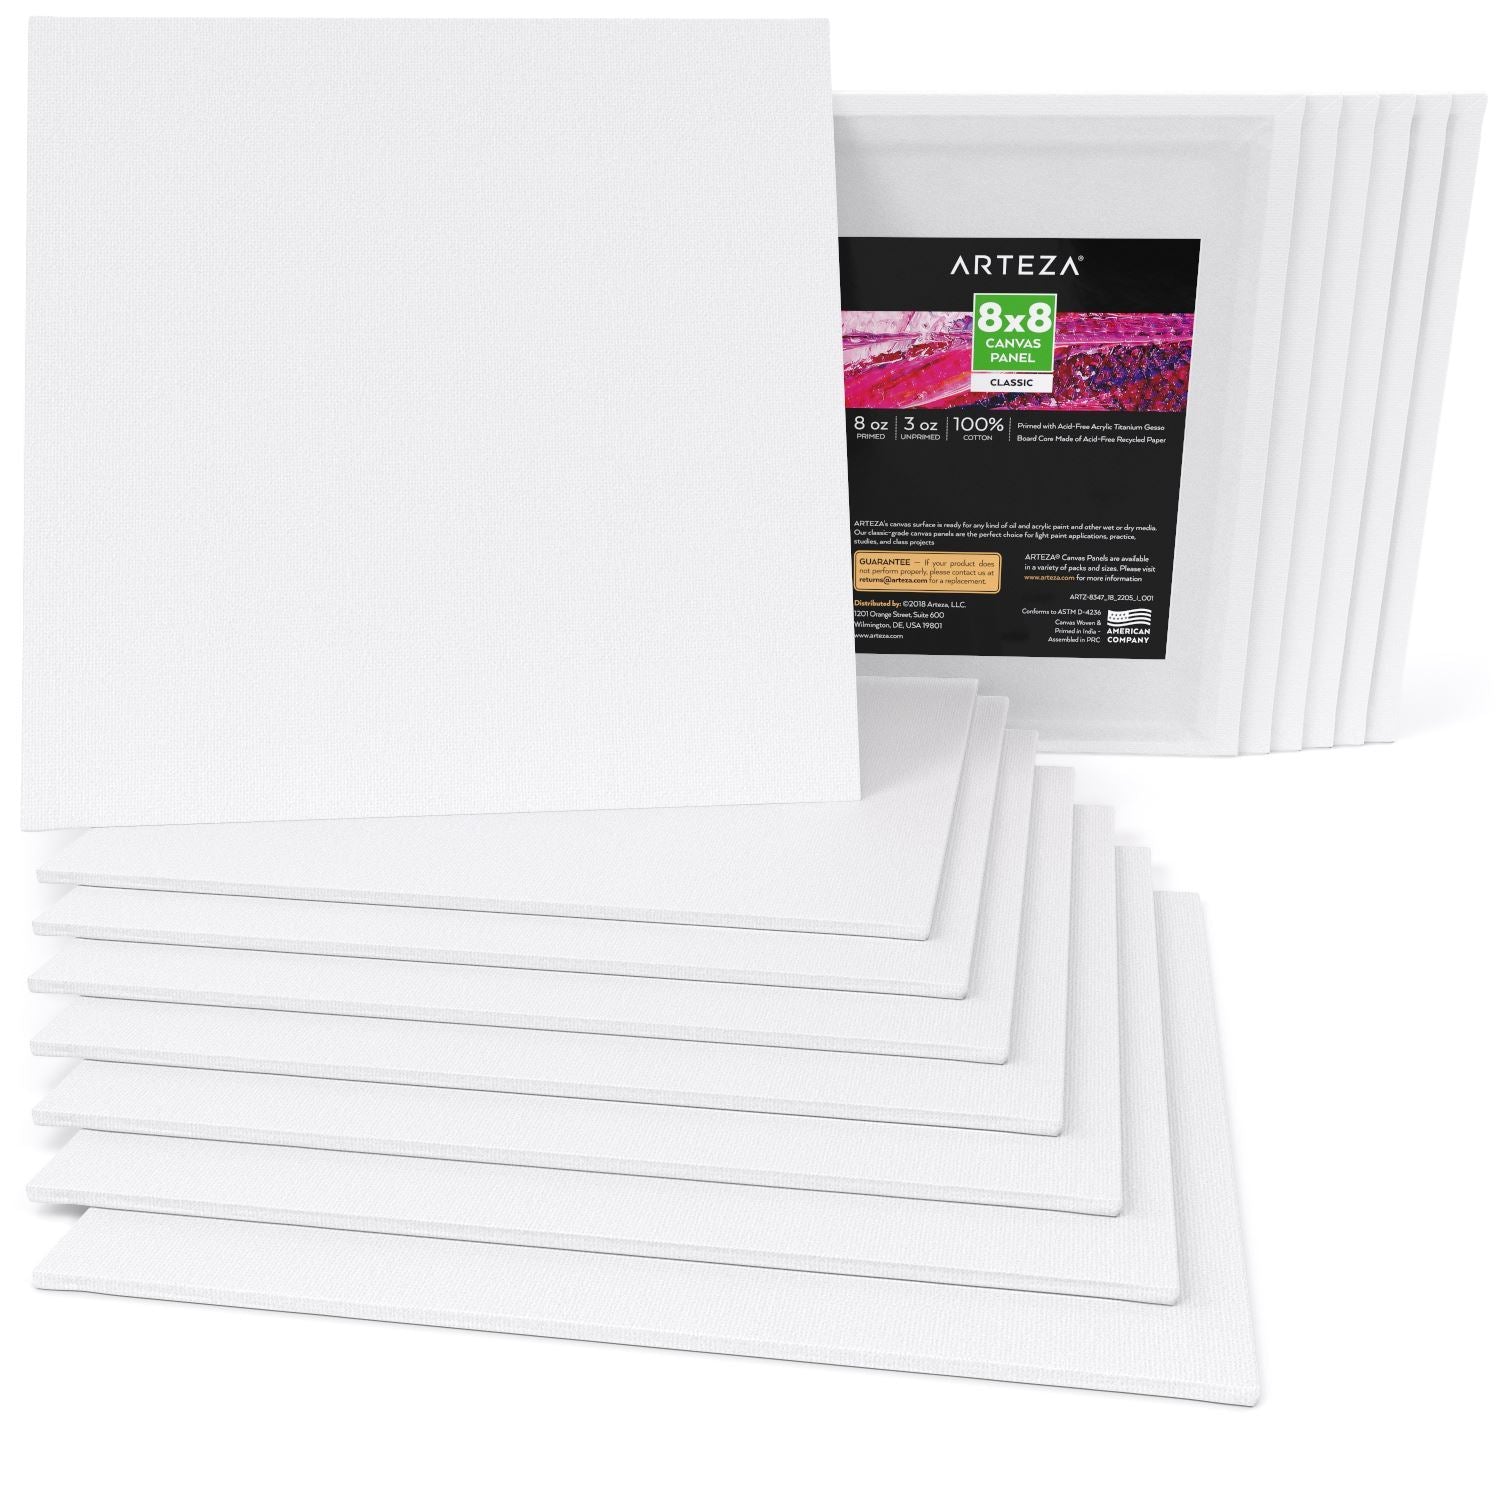 Arteza Stretched Canvas, Pack of 12, 8 x 8 Inches, Square White Canvases, 100% C